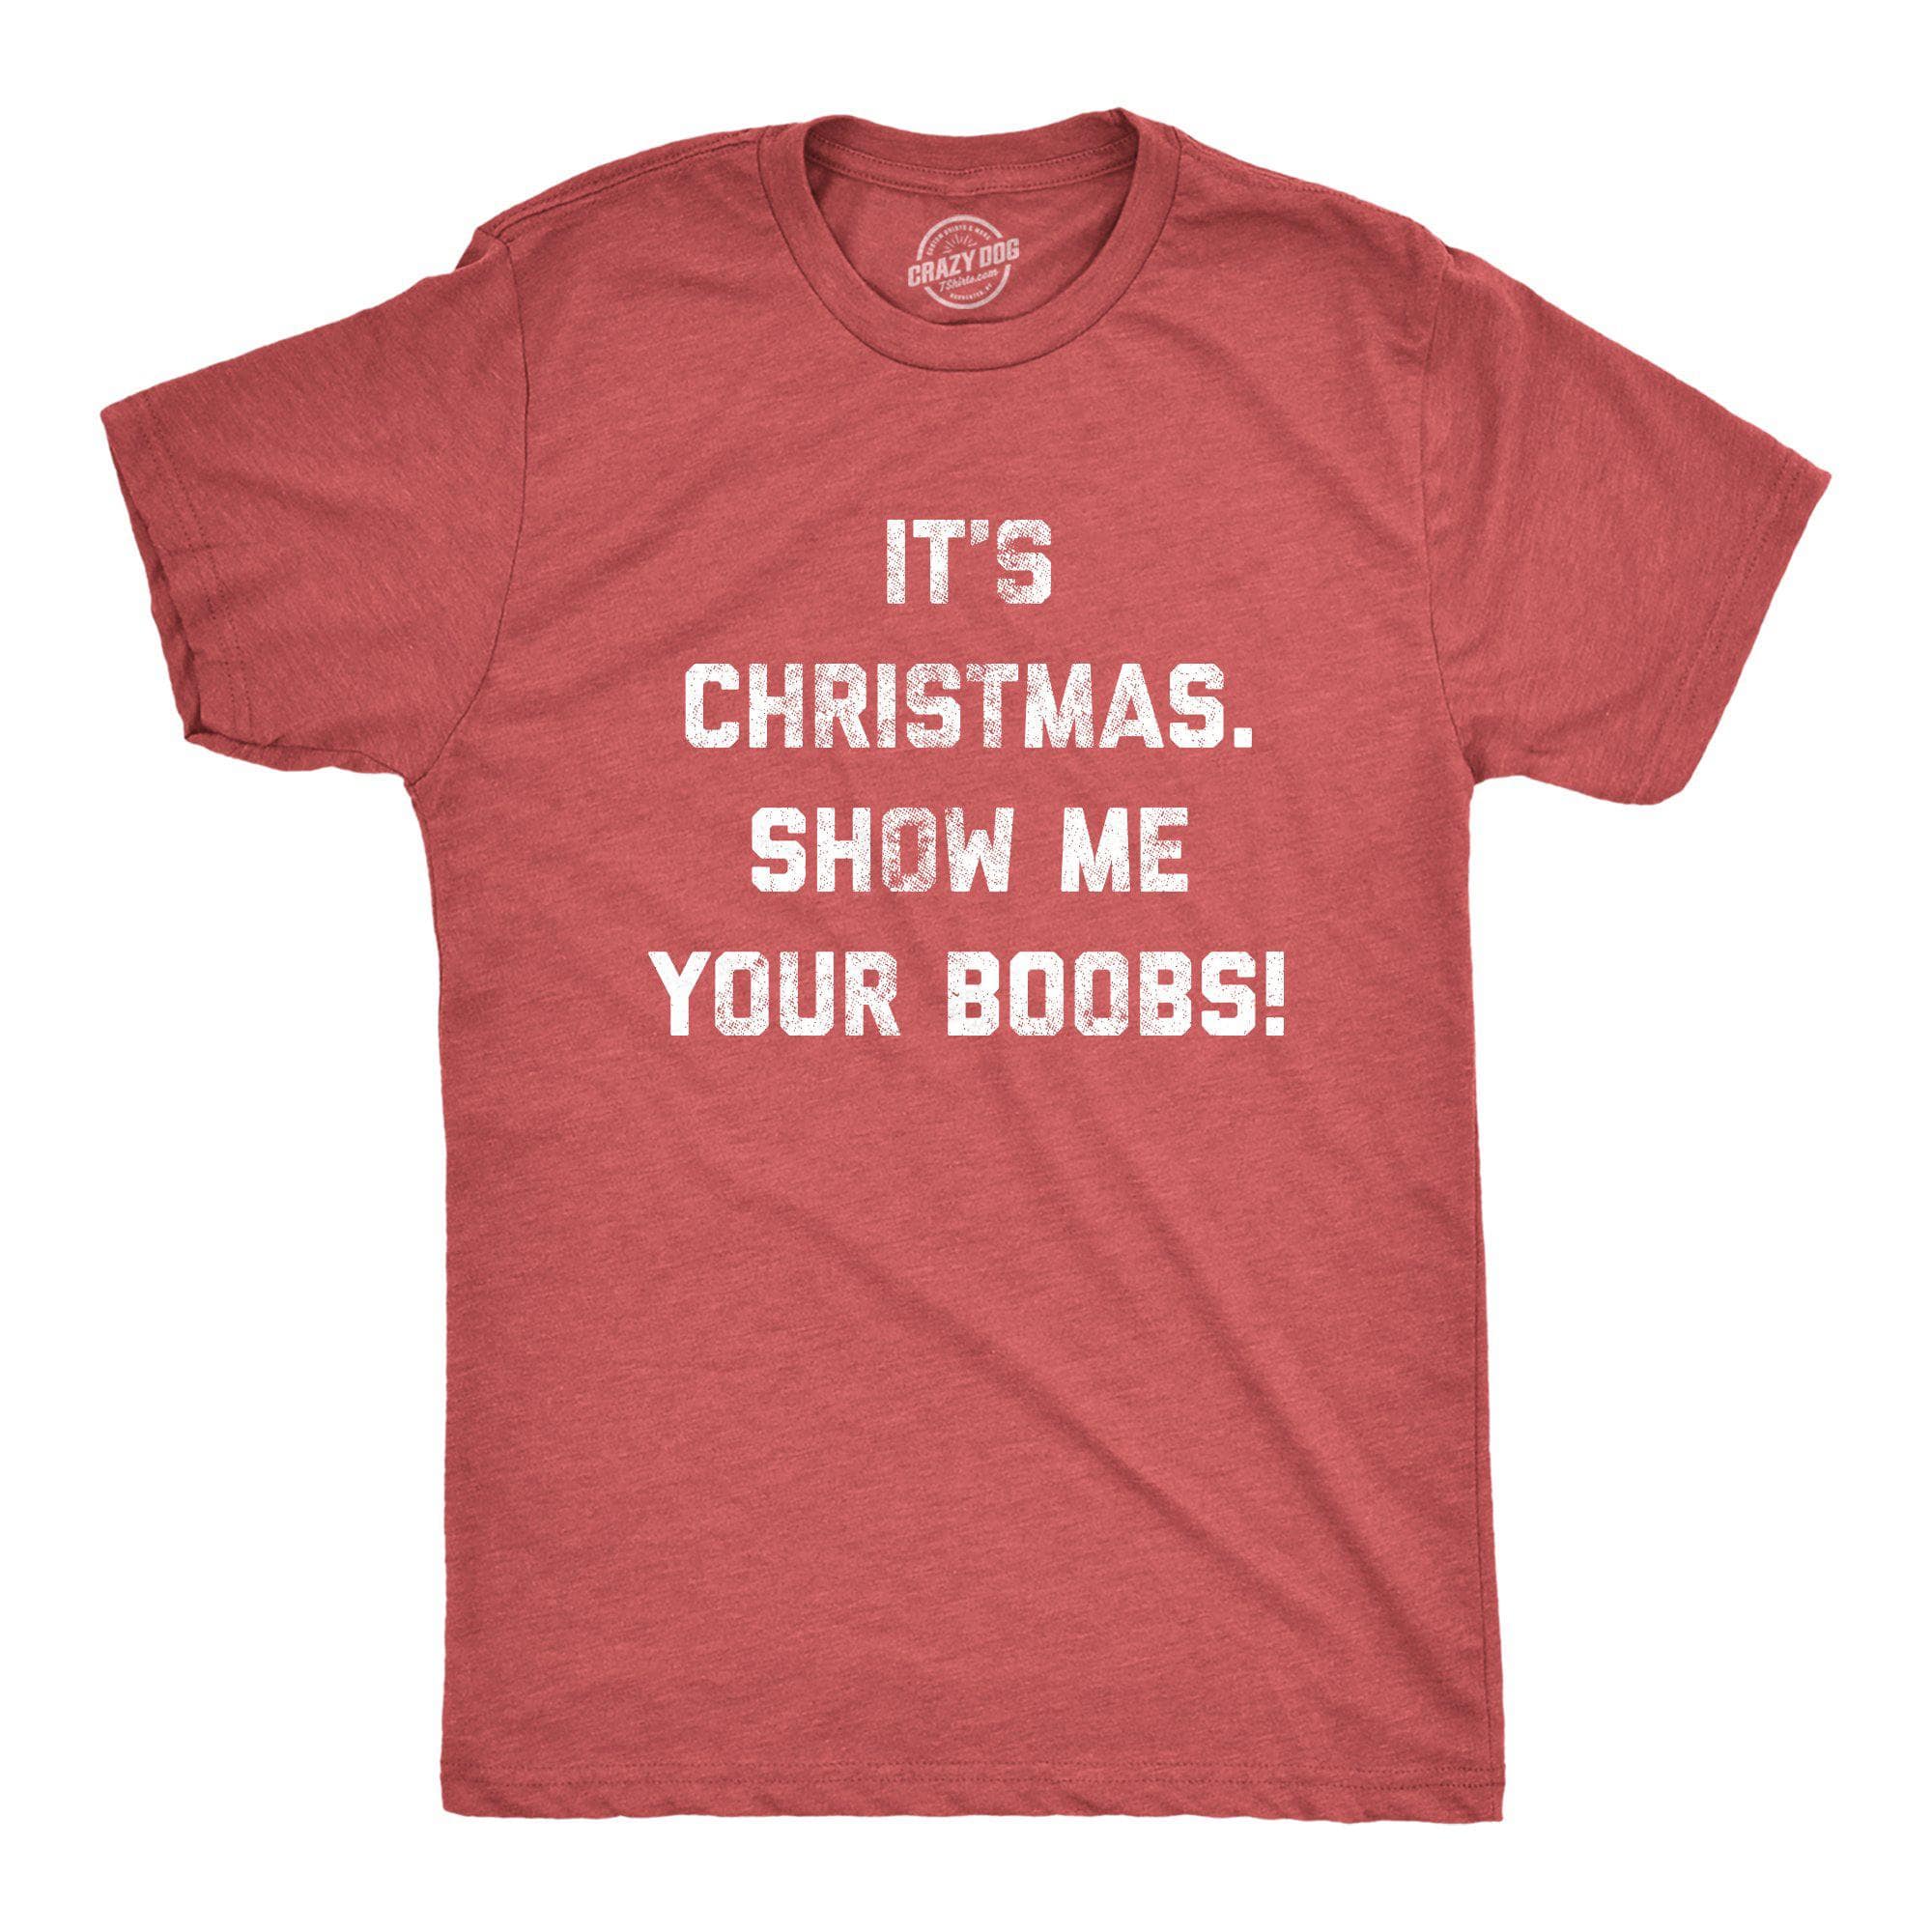 It's Christmas Show Me Your Boobs Men's Tshirt - Crazy Dog T-Shirts